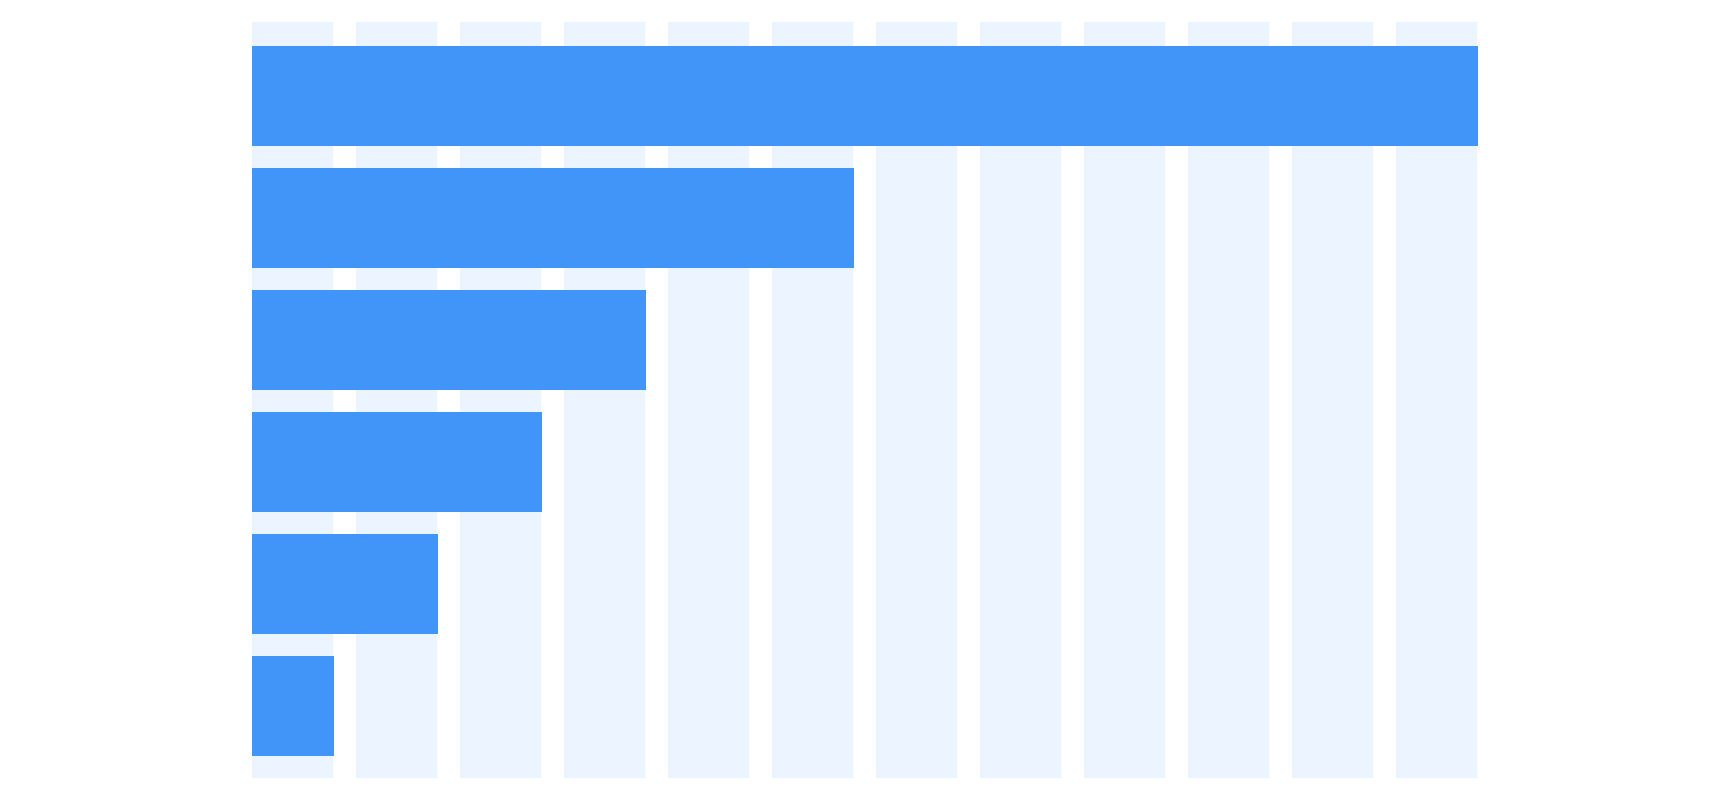 Content regions that span 1,2,3,4,6,8 or 12 columns.